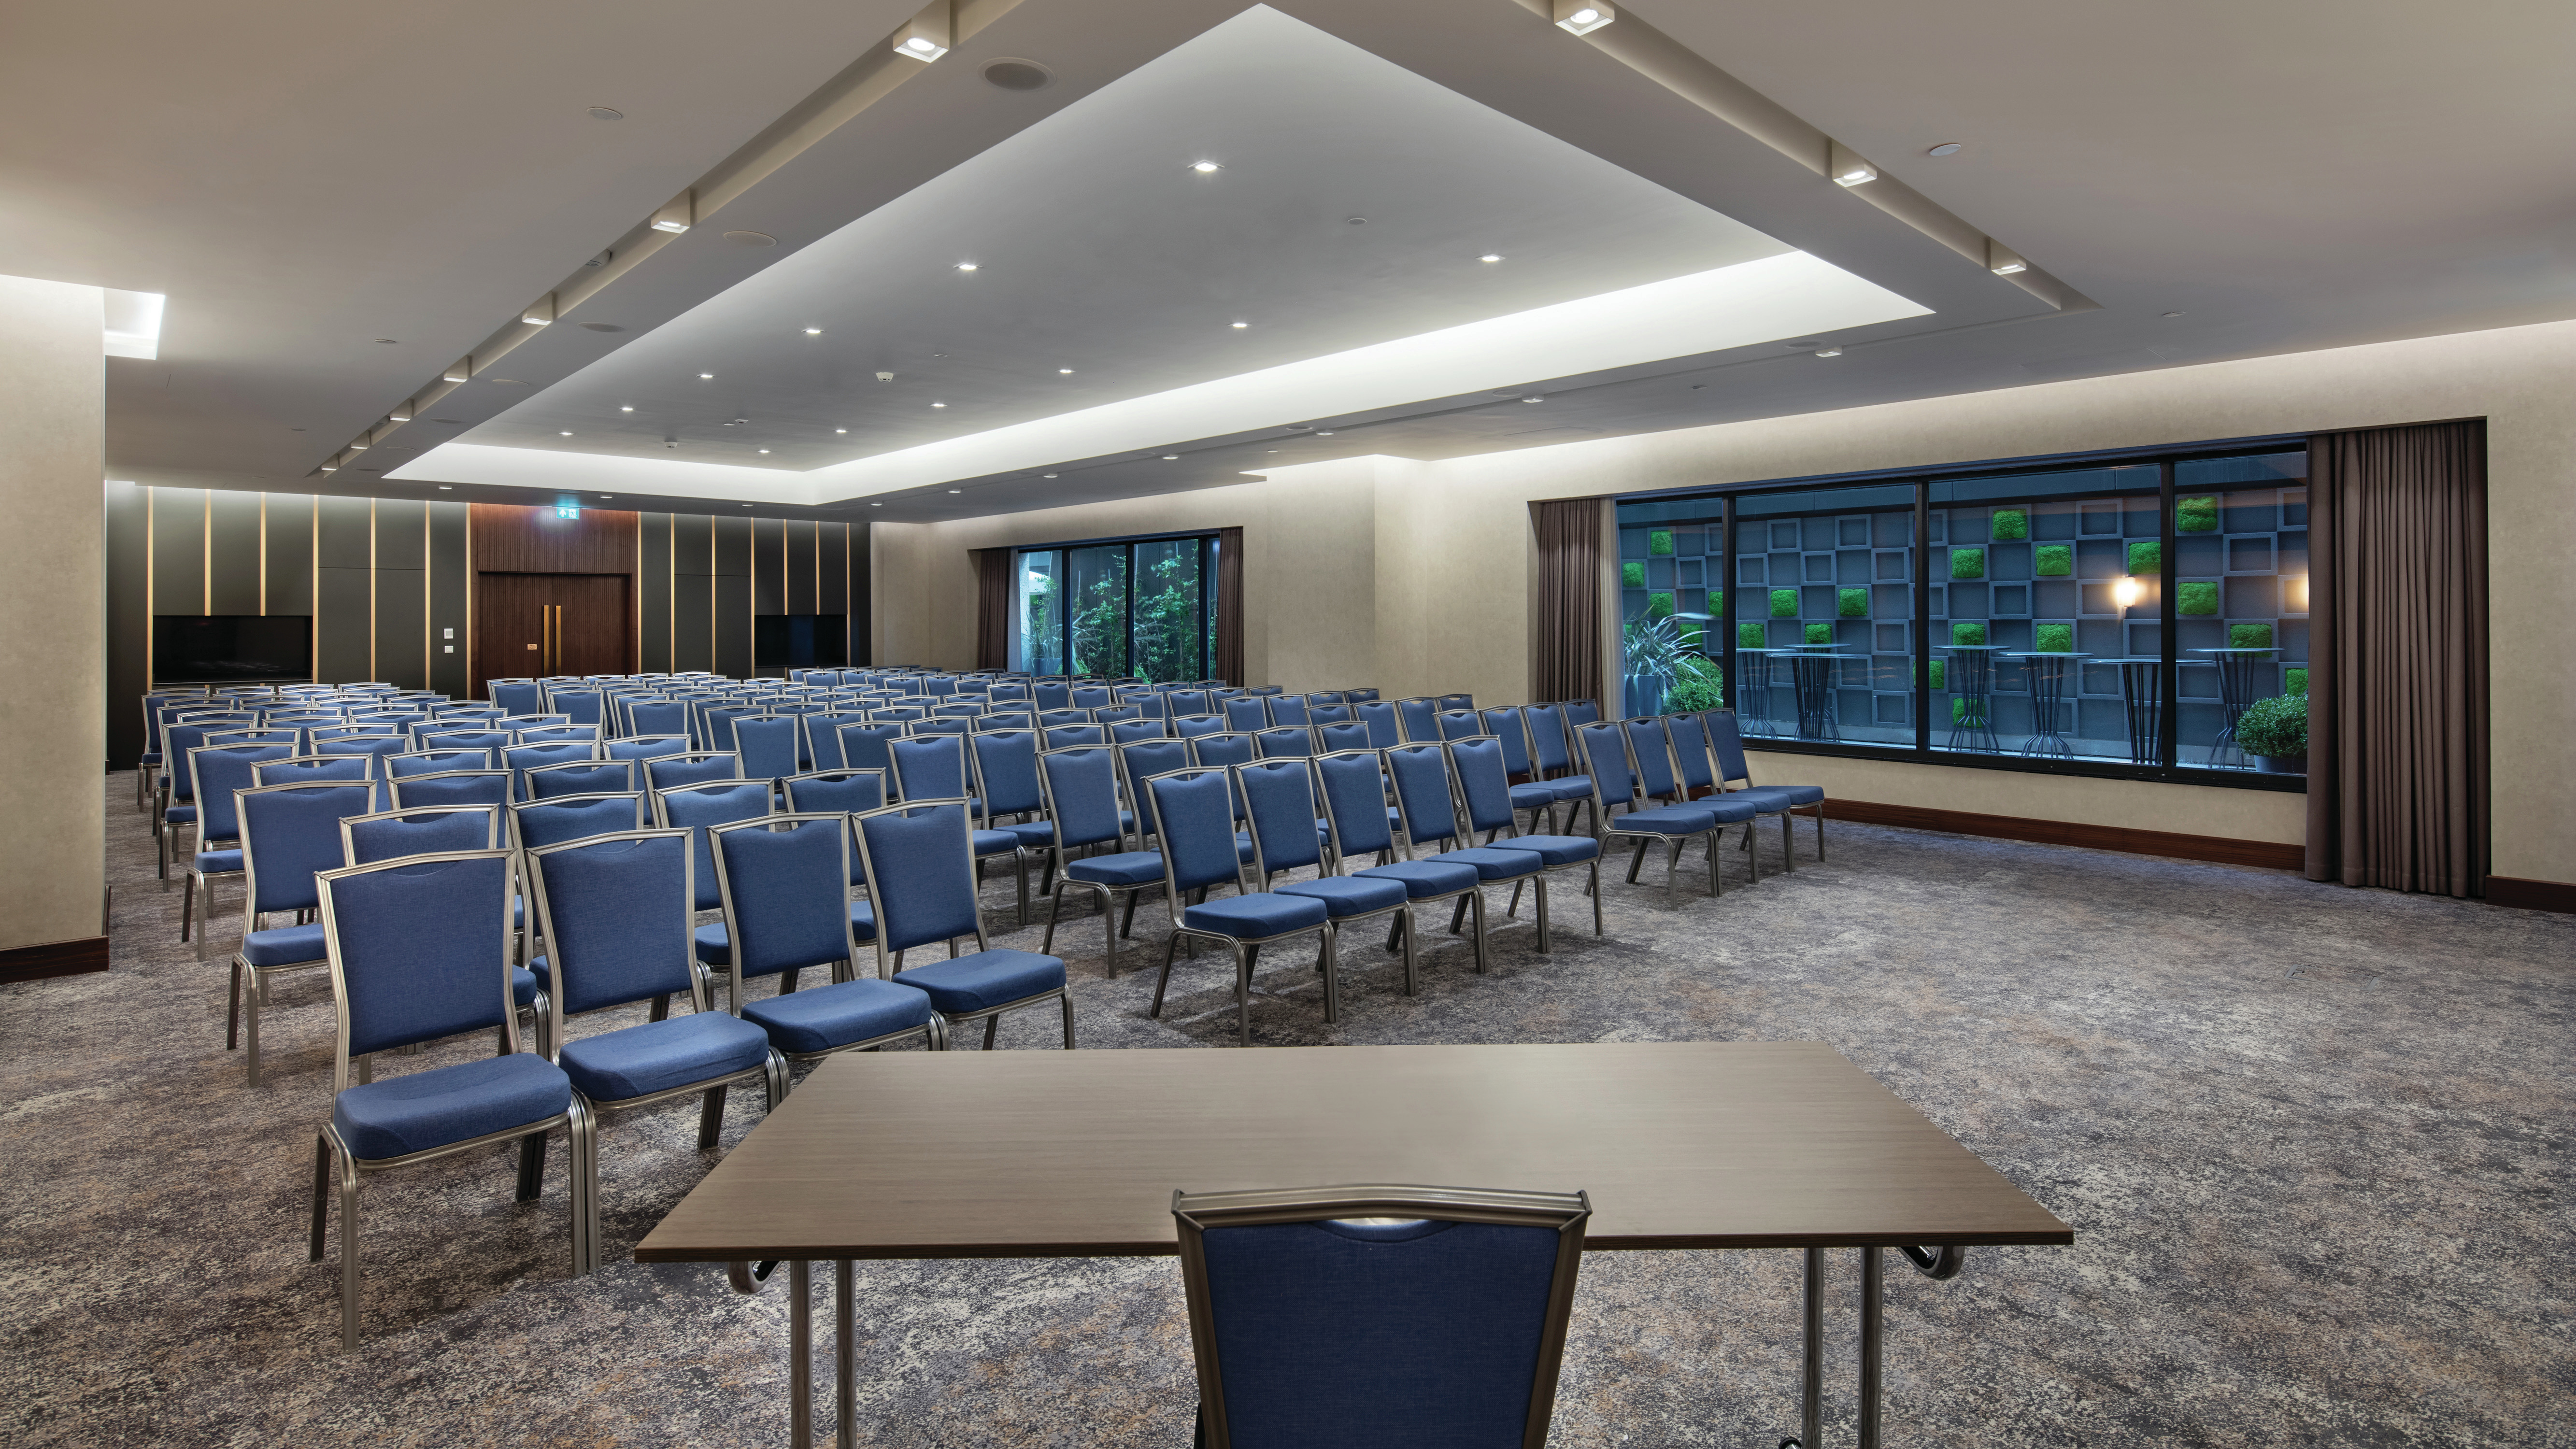 Diamond Meeting Room in Theater Set Up